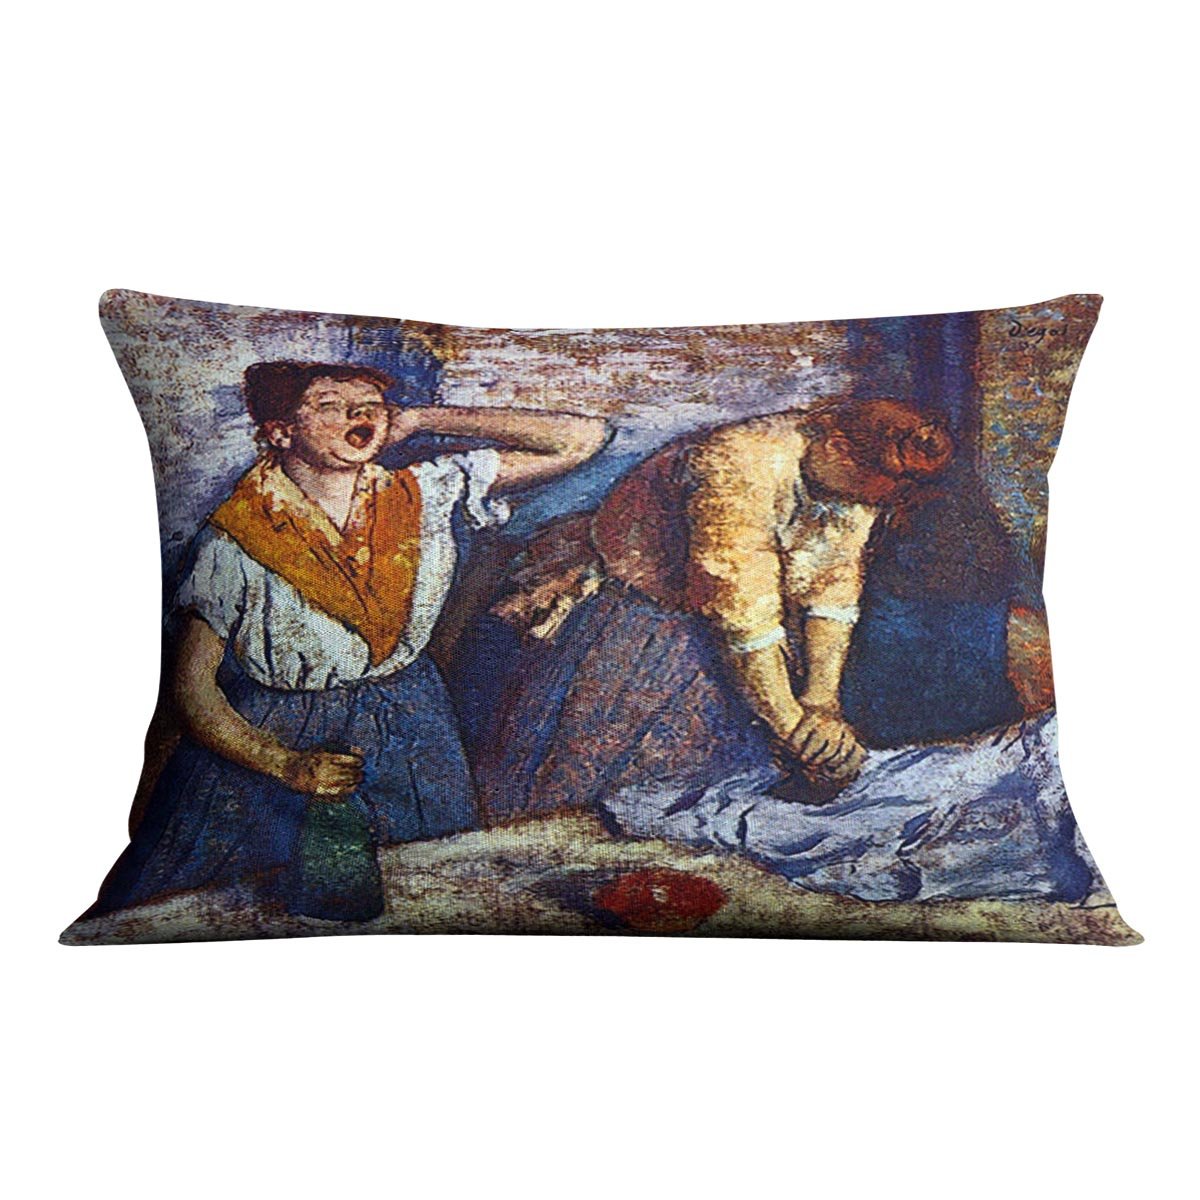 Two cleaning women by Degas Cushion